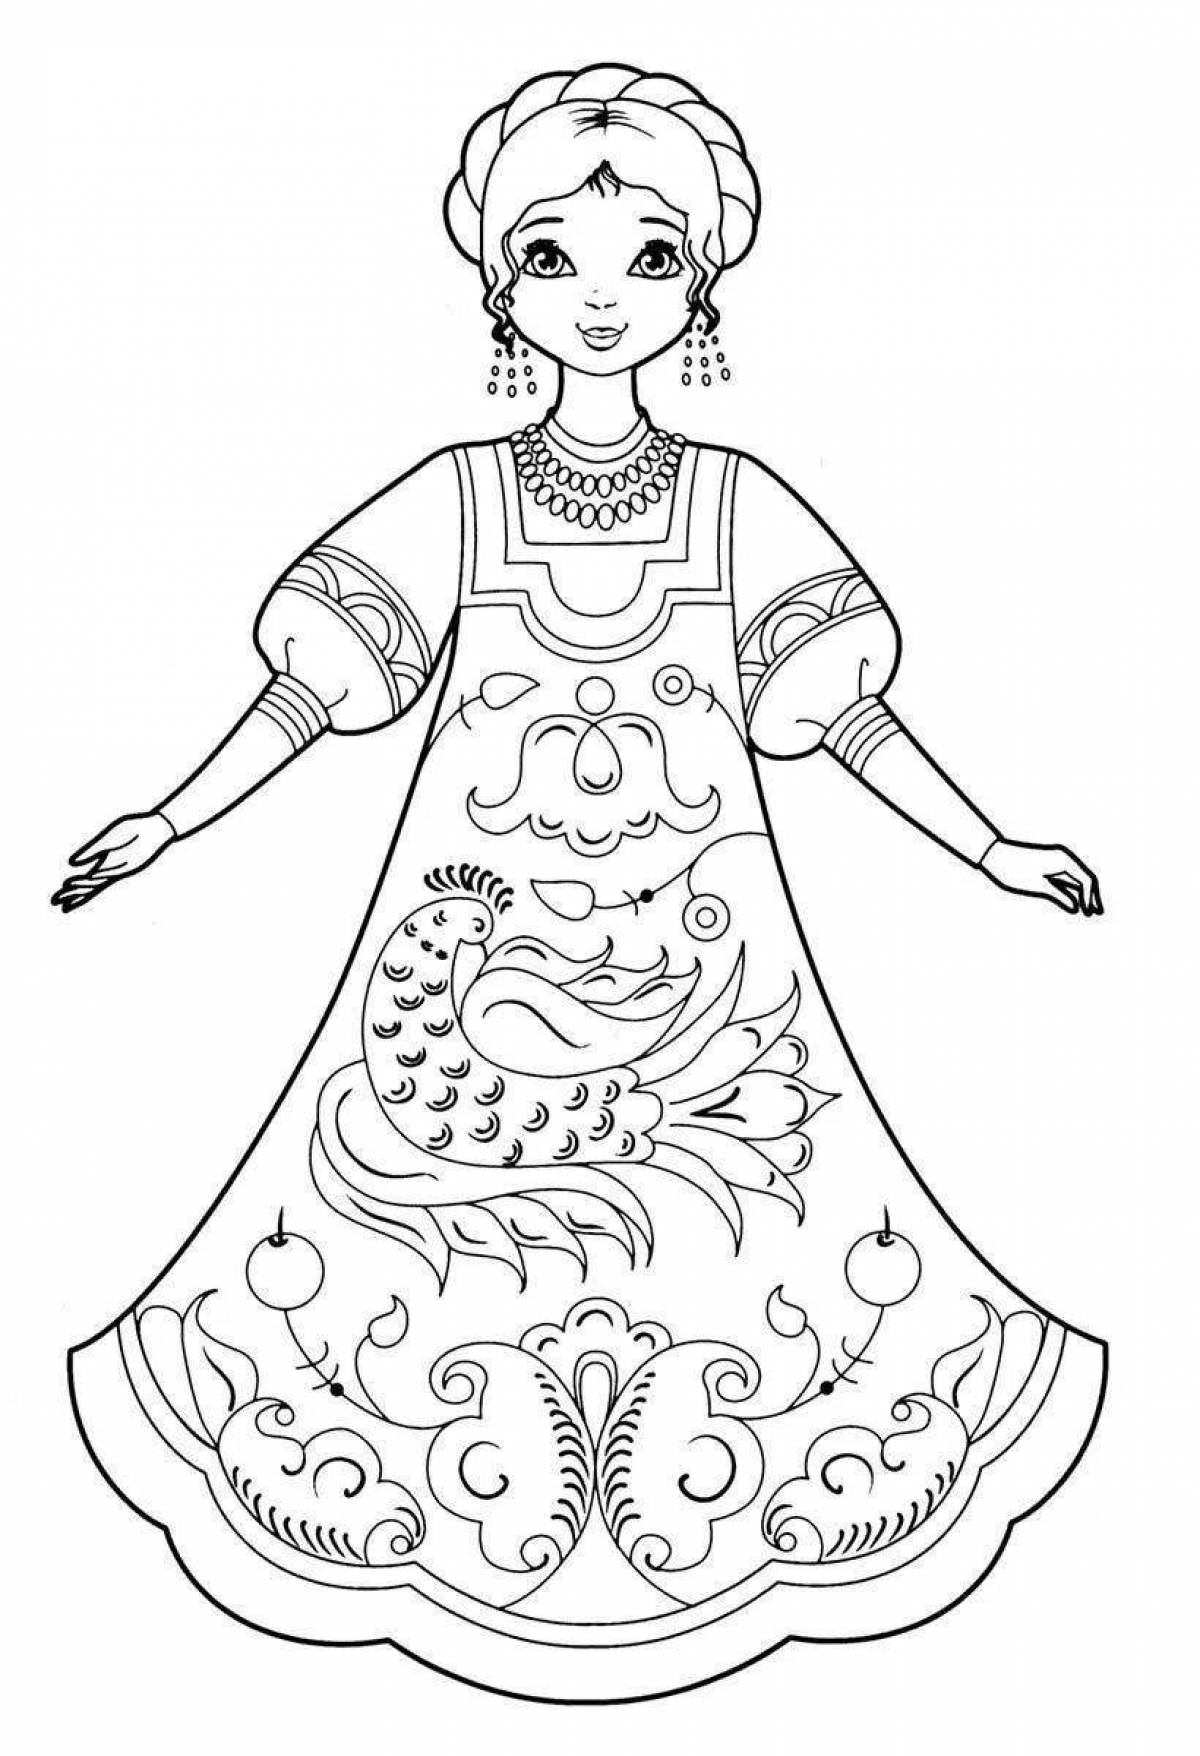 Perfect Russian beauty coloring book